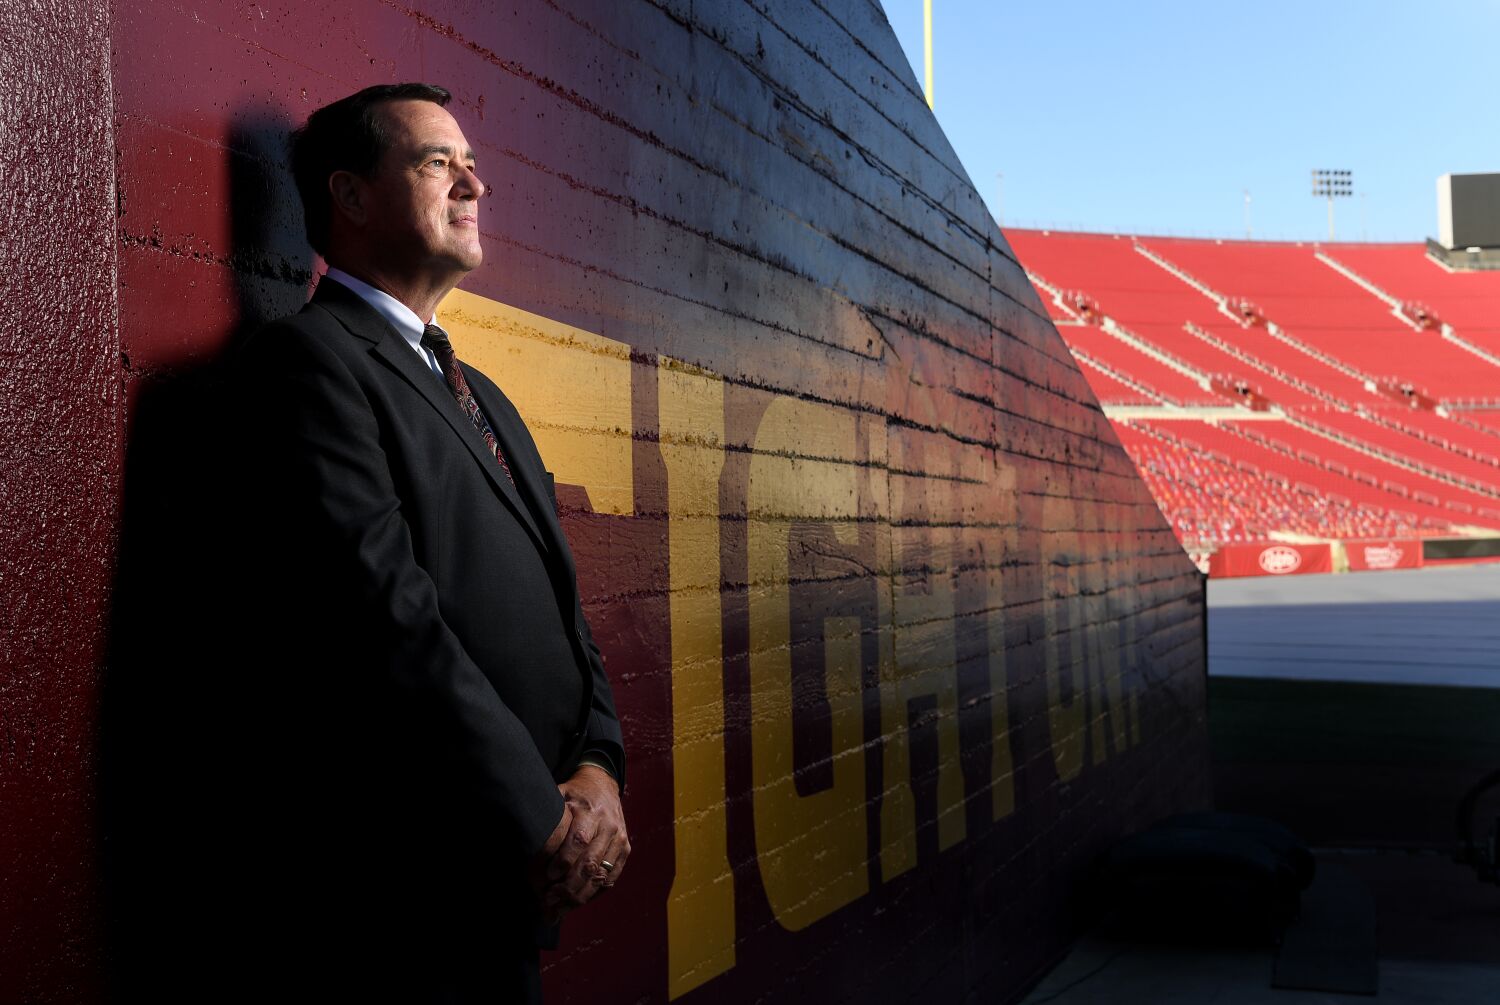 How did USC and Turnkey miss on Mike Bohn? Search firm industry insiders expose flaws